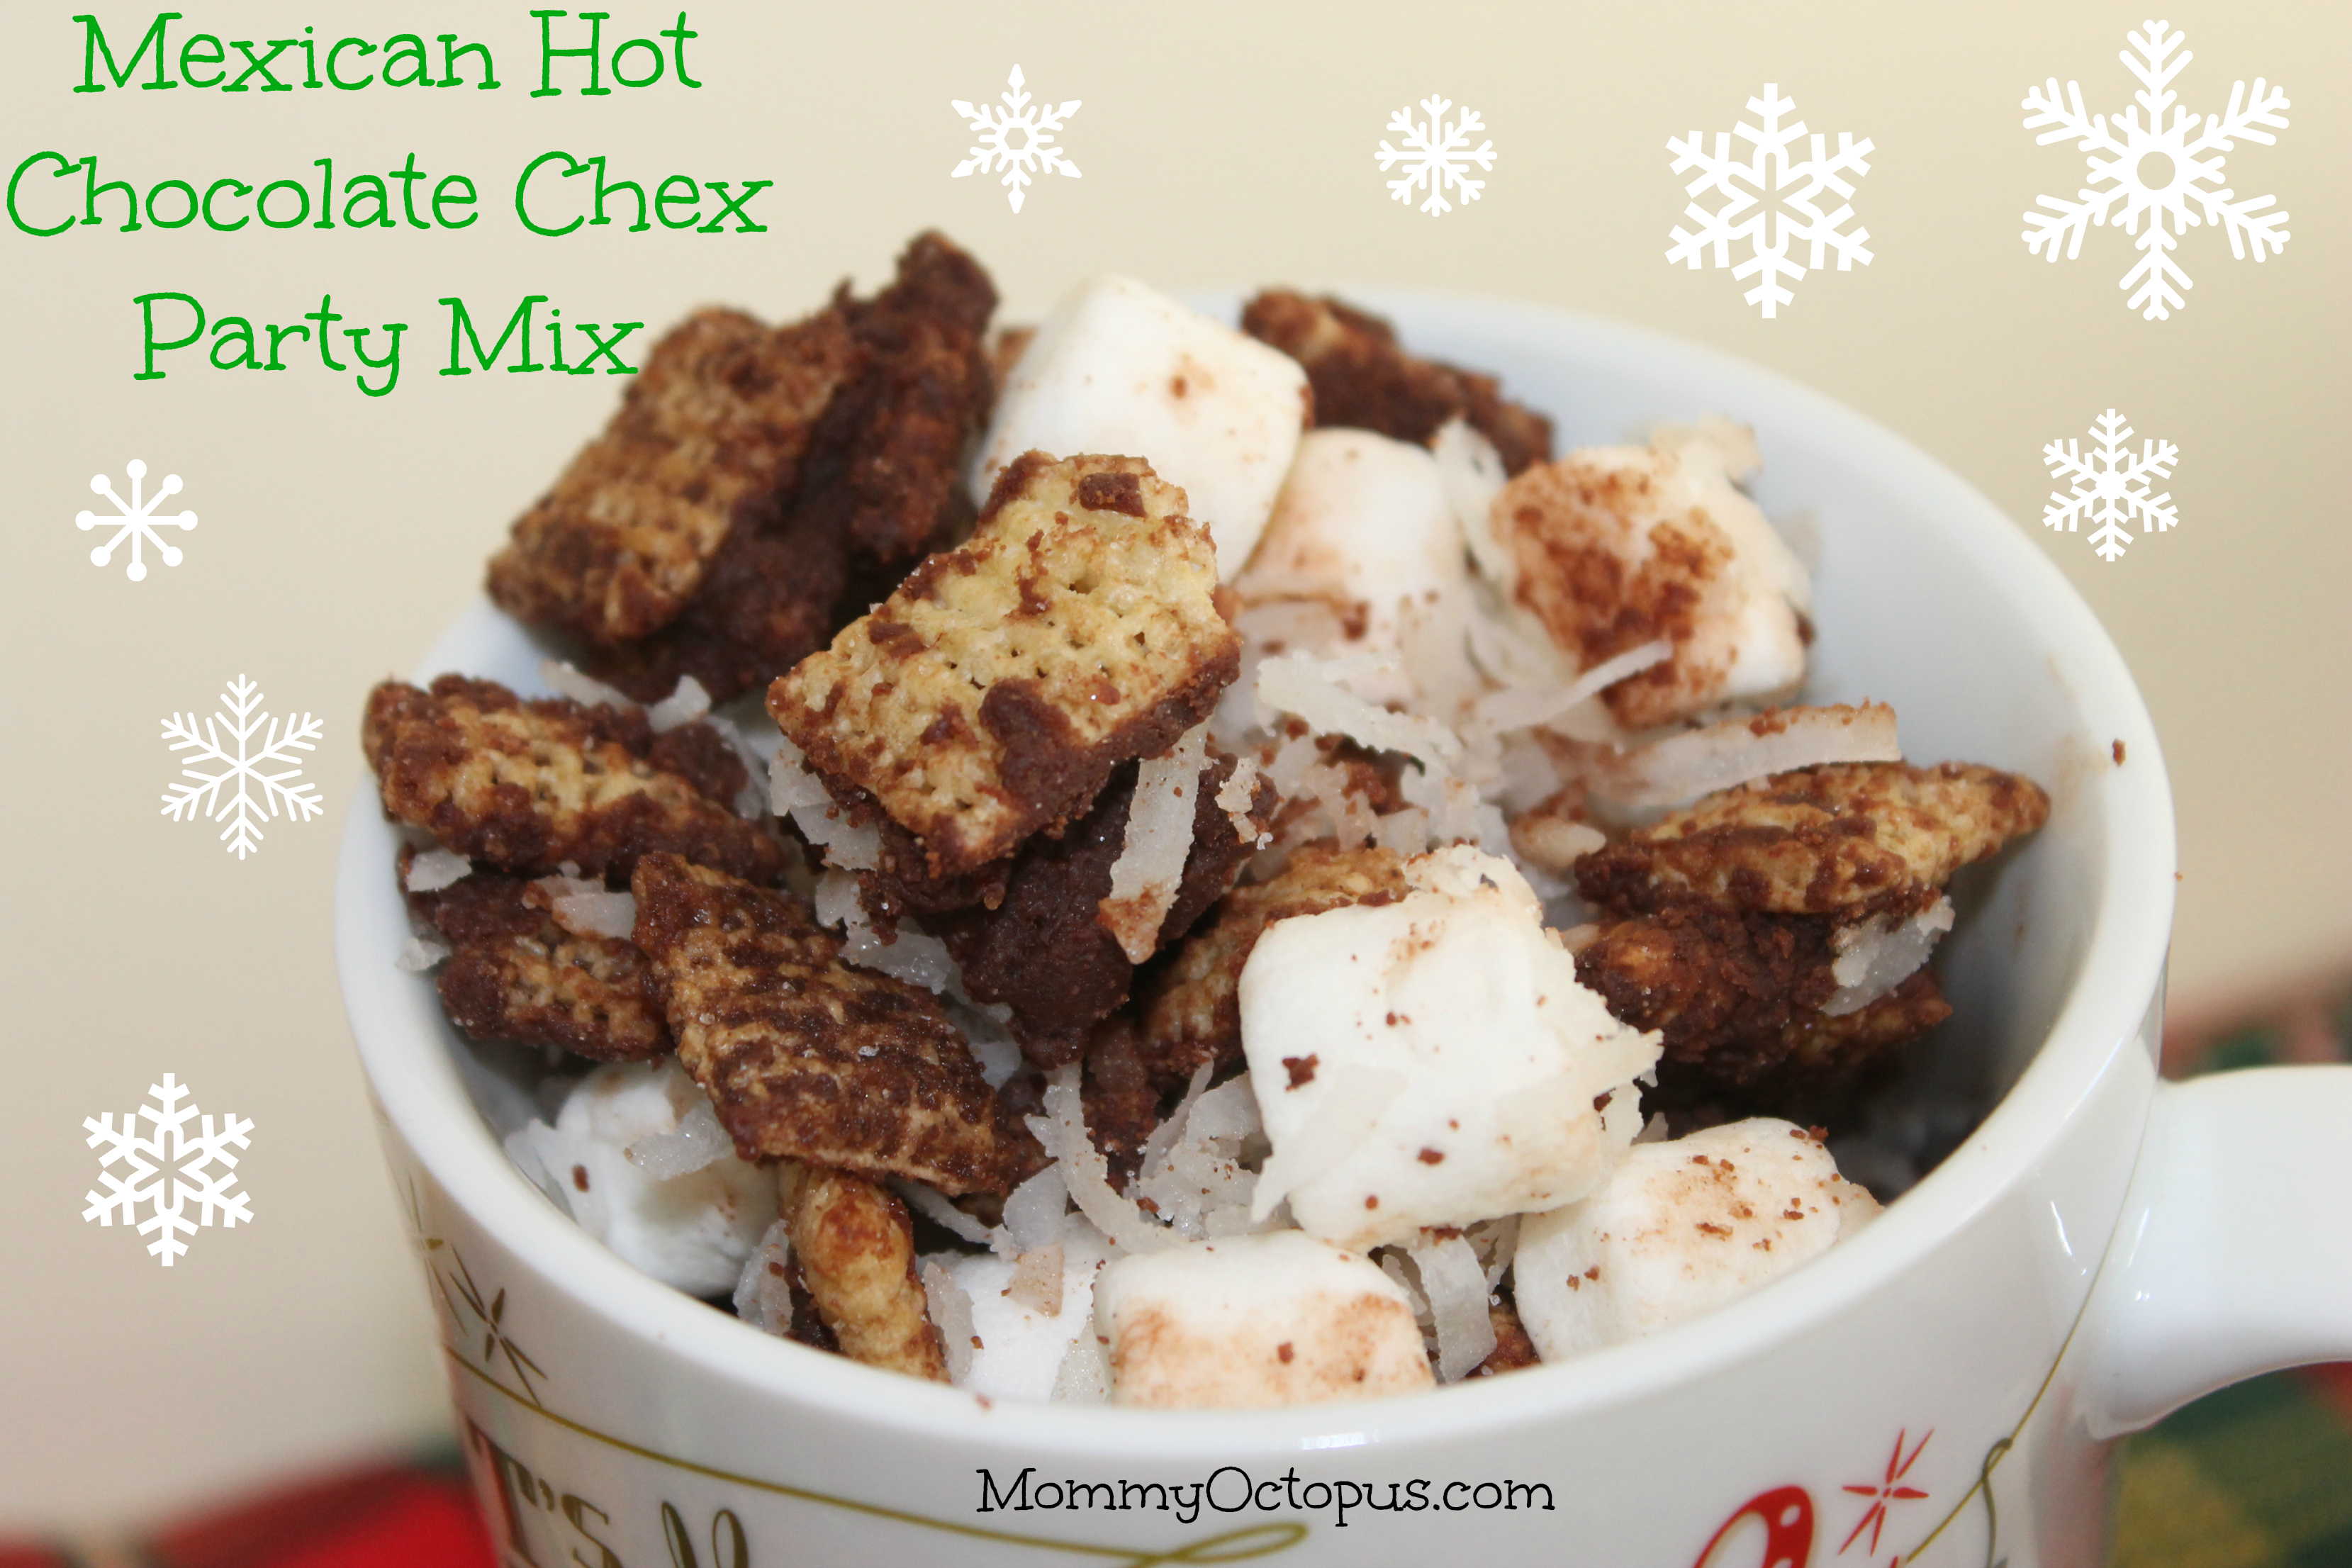 Mexican Hot Chocolate Chex Party Mix